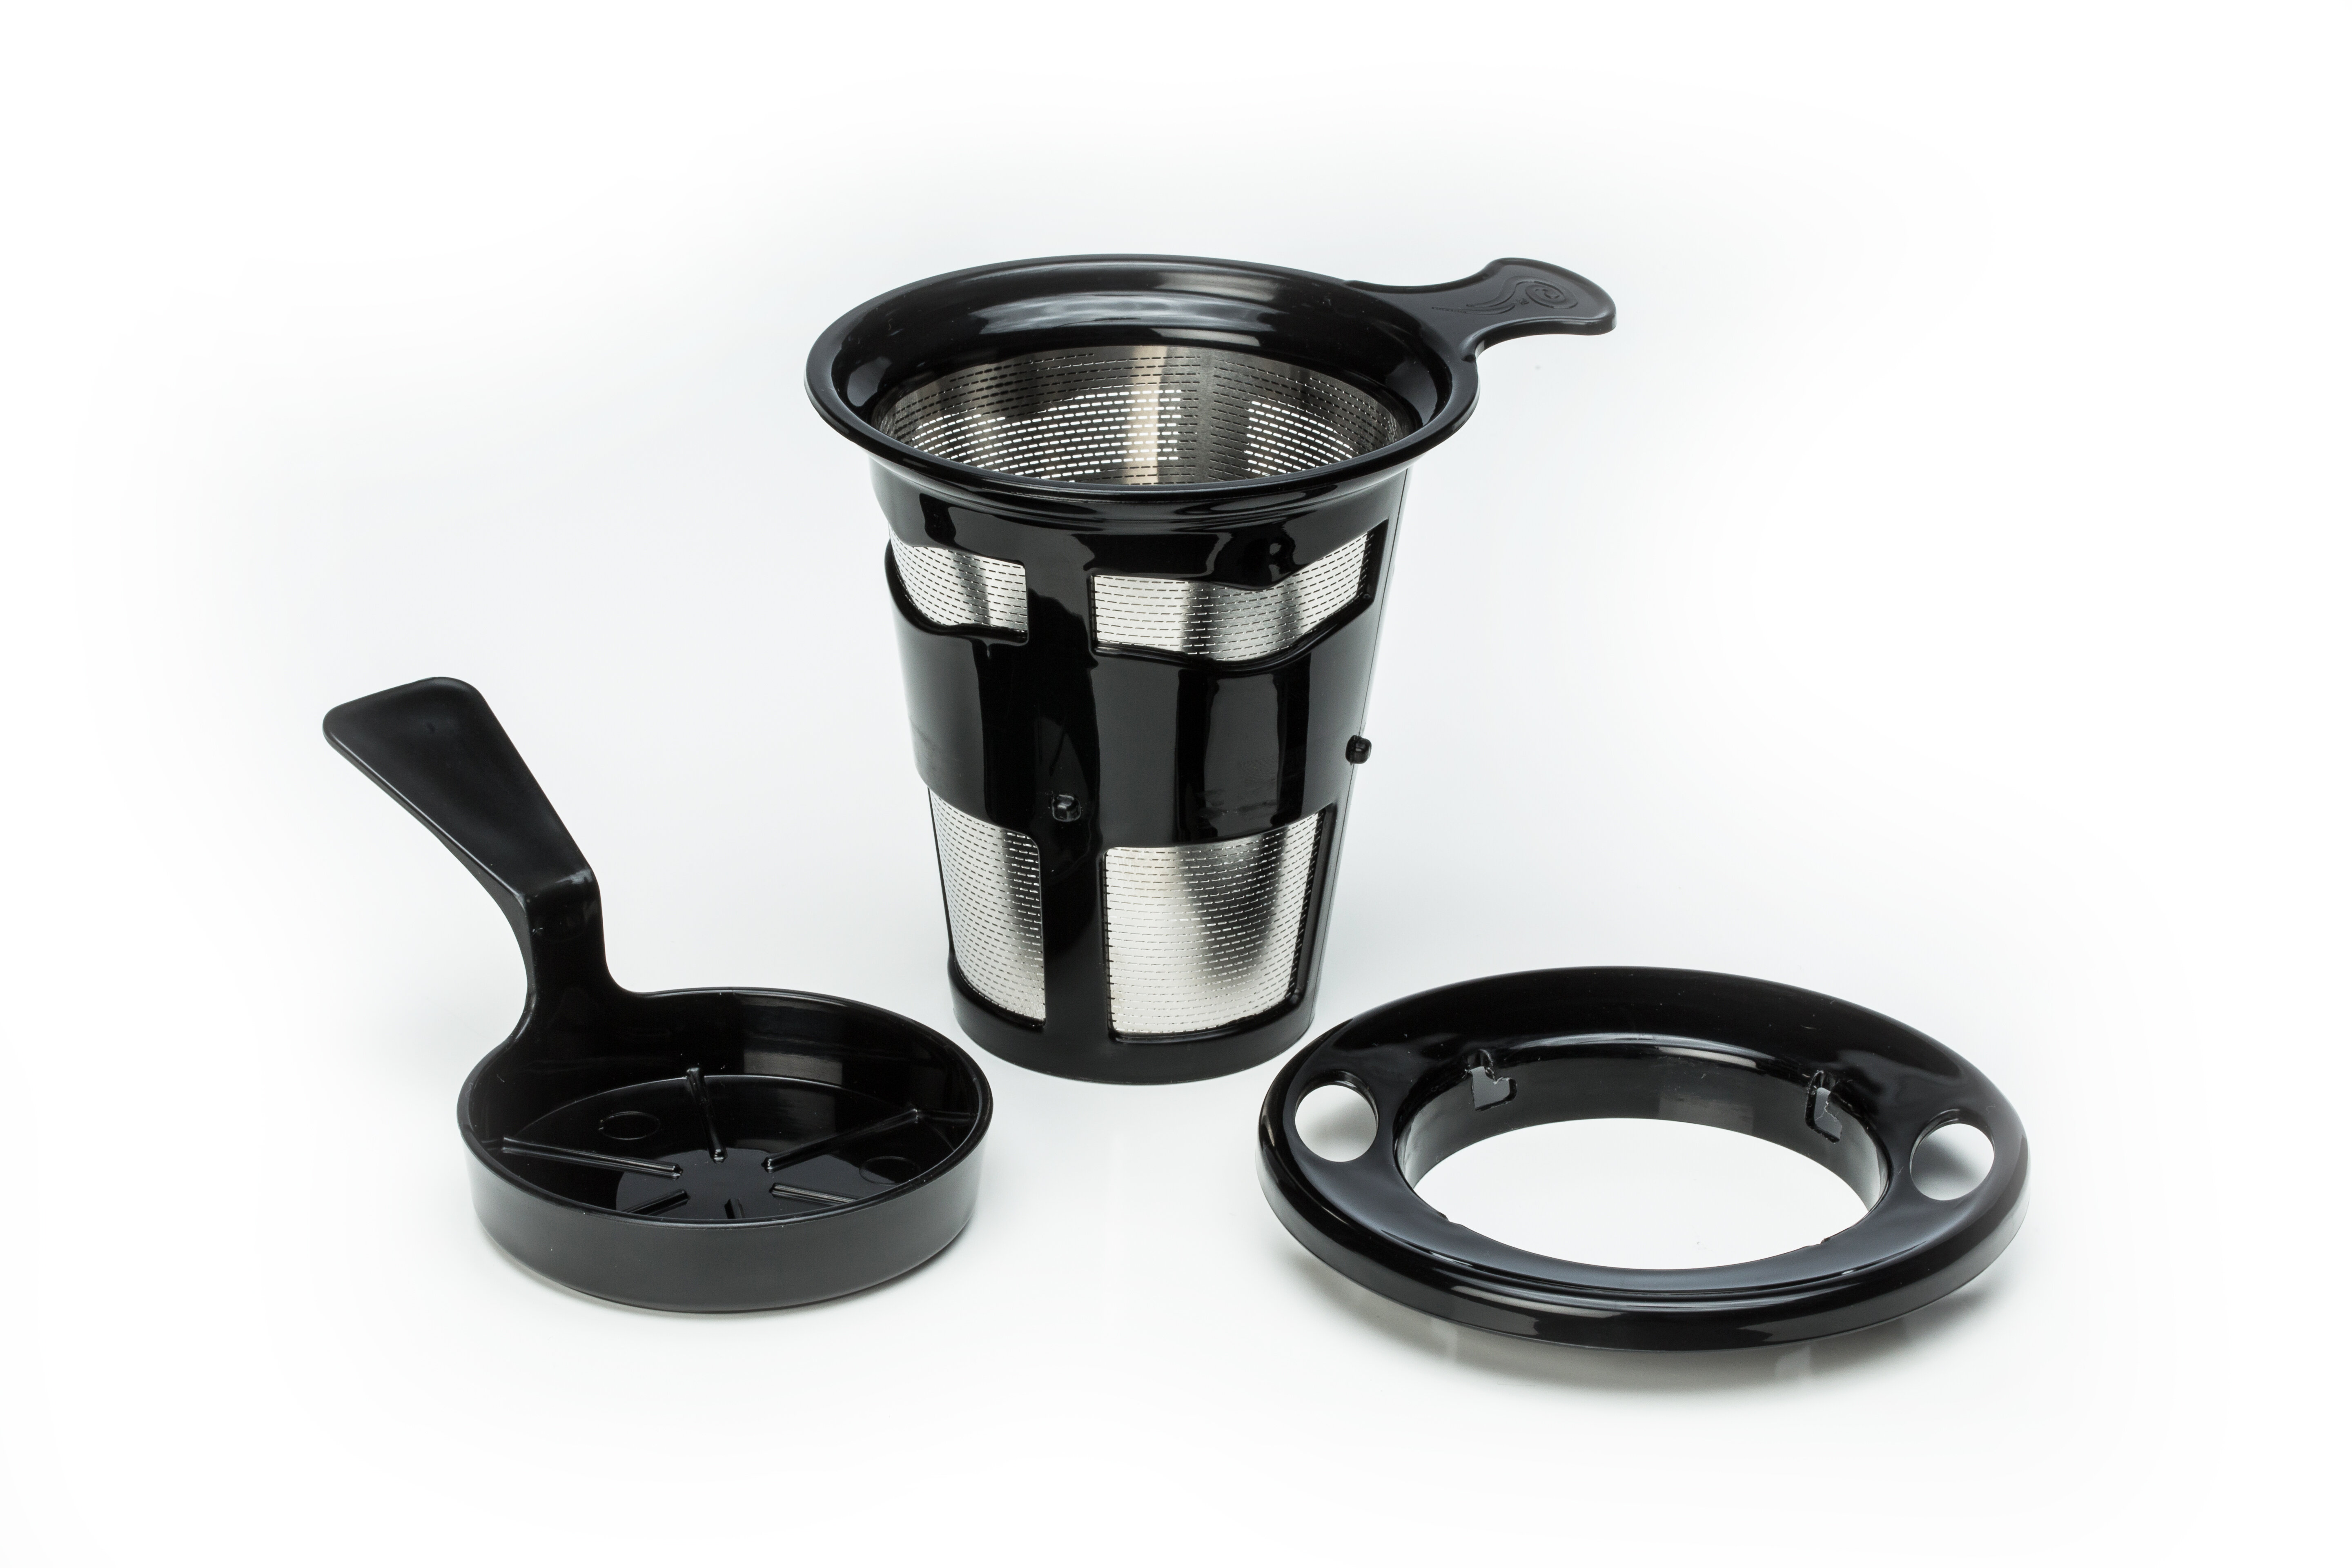 Stainless Steel Coffee Filter Uses with Cup, Coffee Maker & Beaker